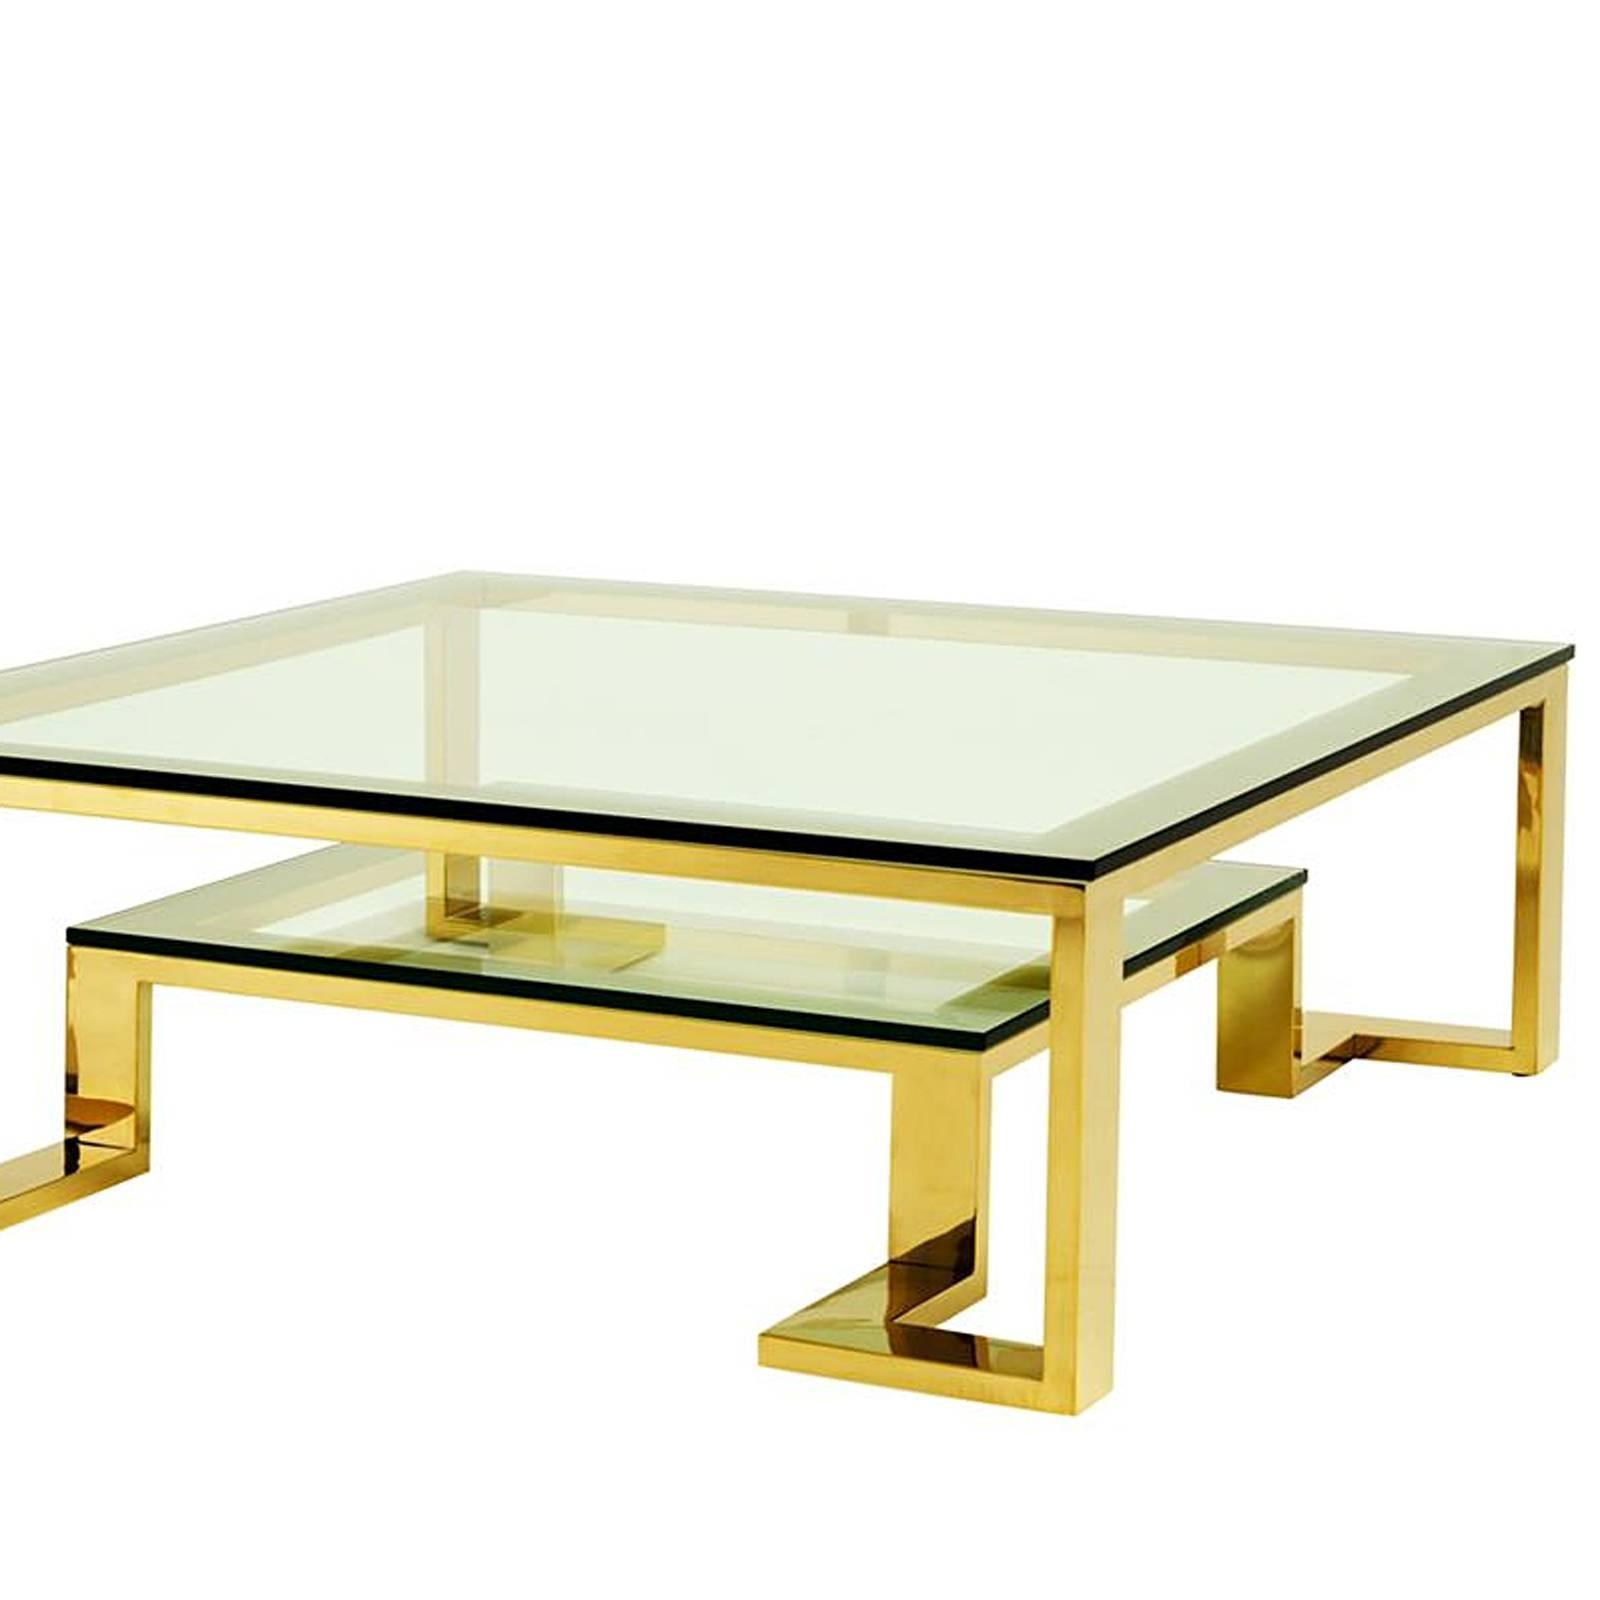 Chinese Wishper Coffee Table in Gold Finish